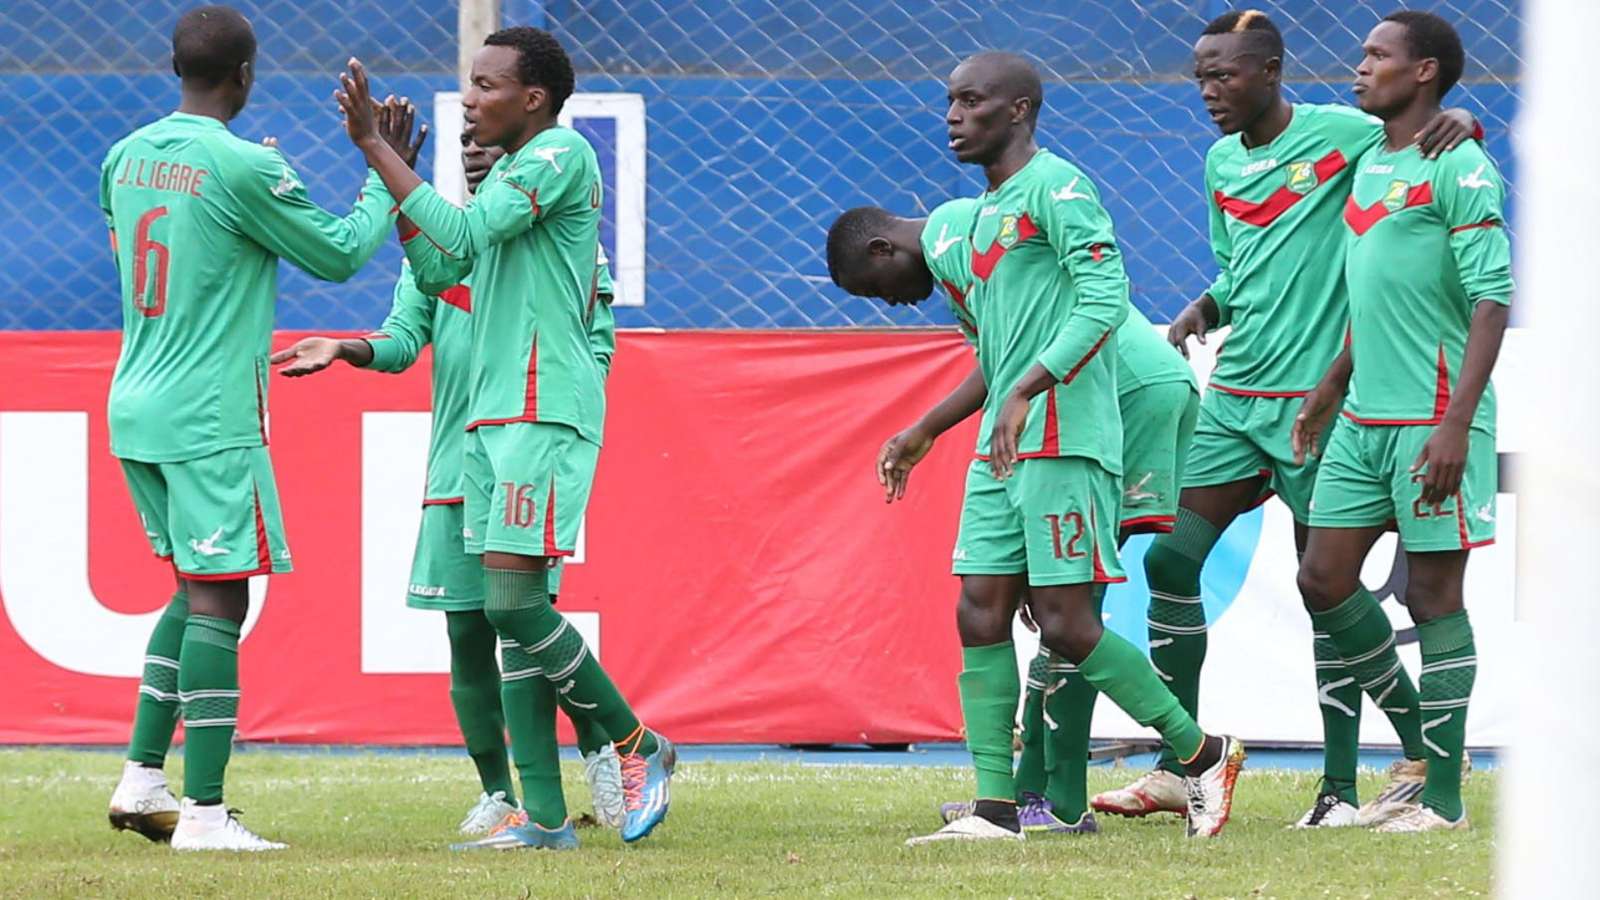 Blow to Zoo Kericho as they lose against the Posta Rangers | FKF Premier League